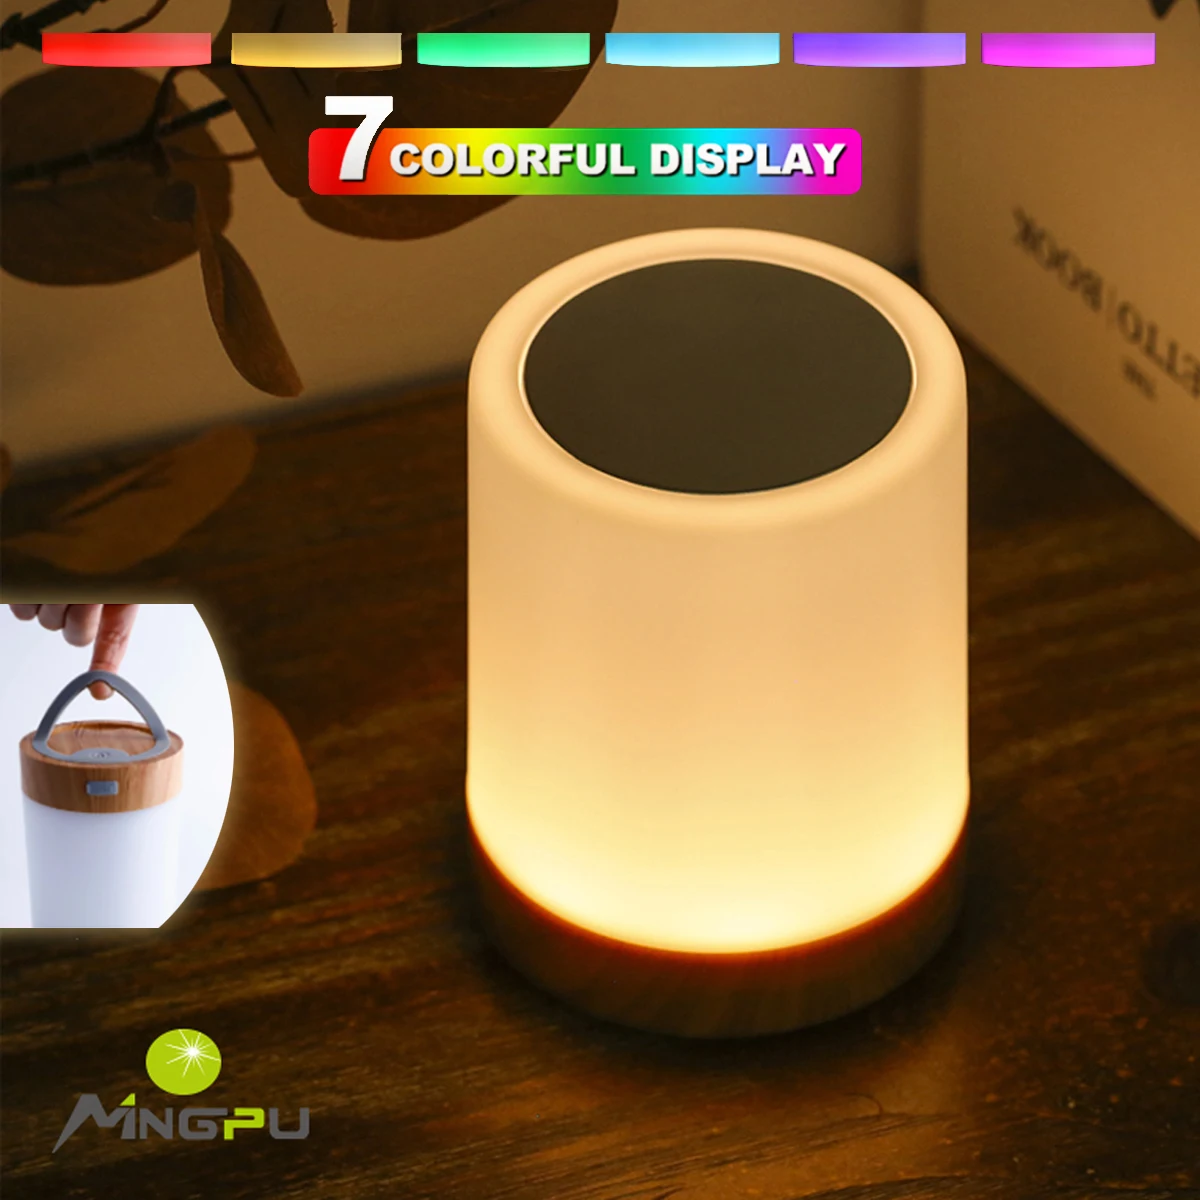 

USB Rechargeable Touching Control Bedside Light Dimmable Table Lamp Warm White & RGB Night Light For Living Room Bedrooms Office